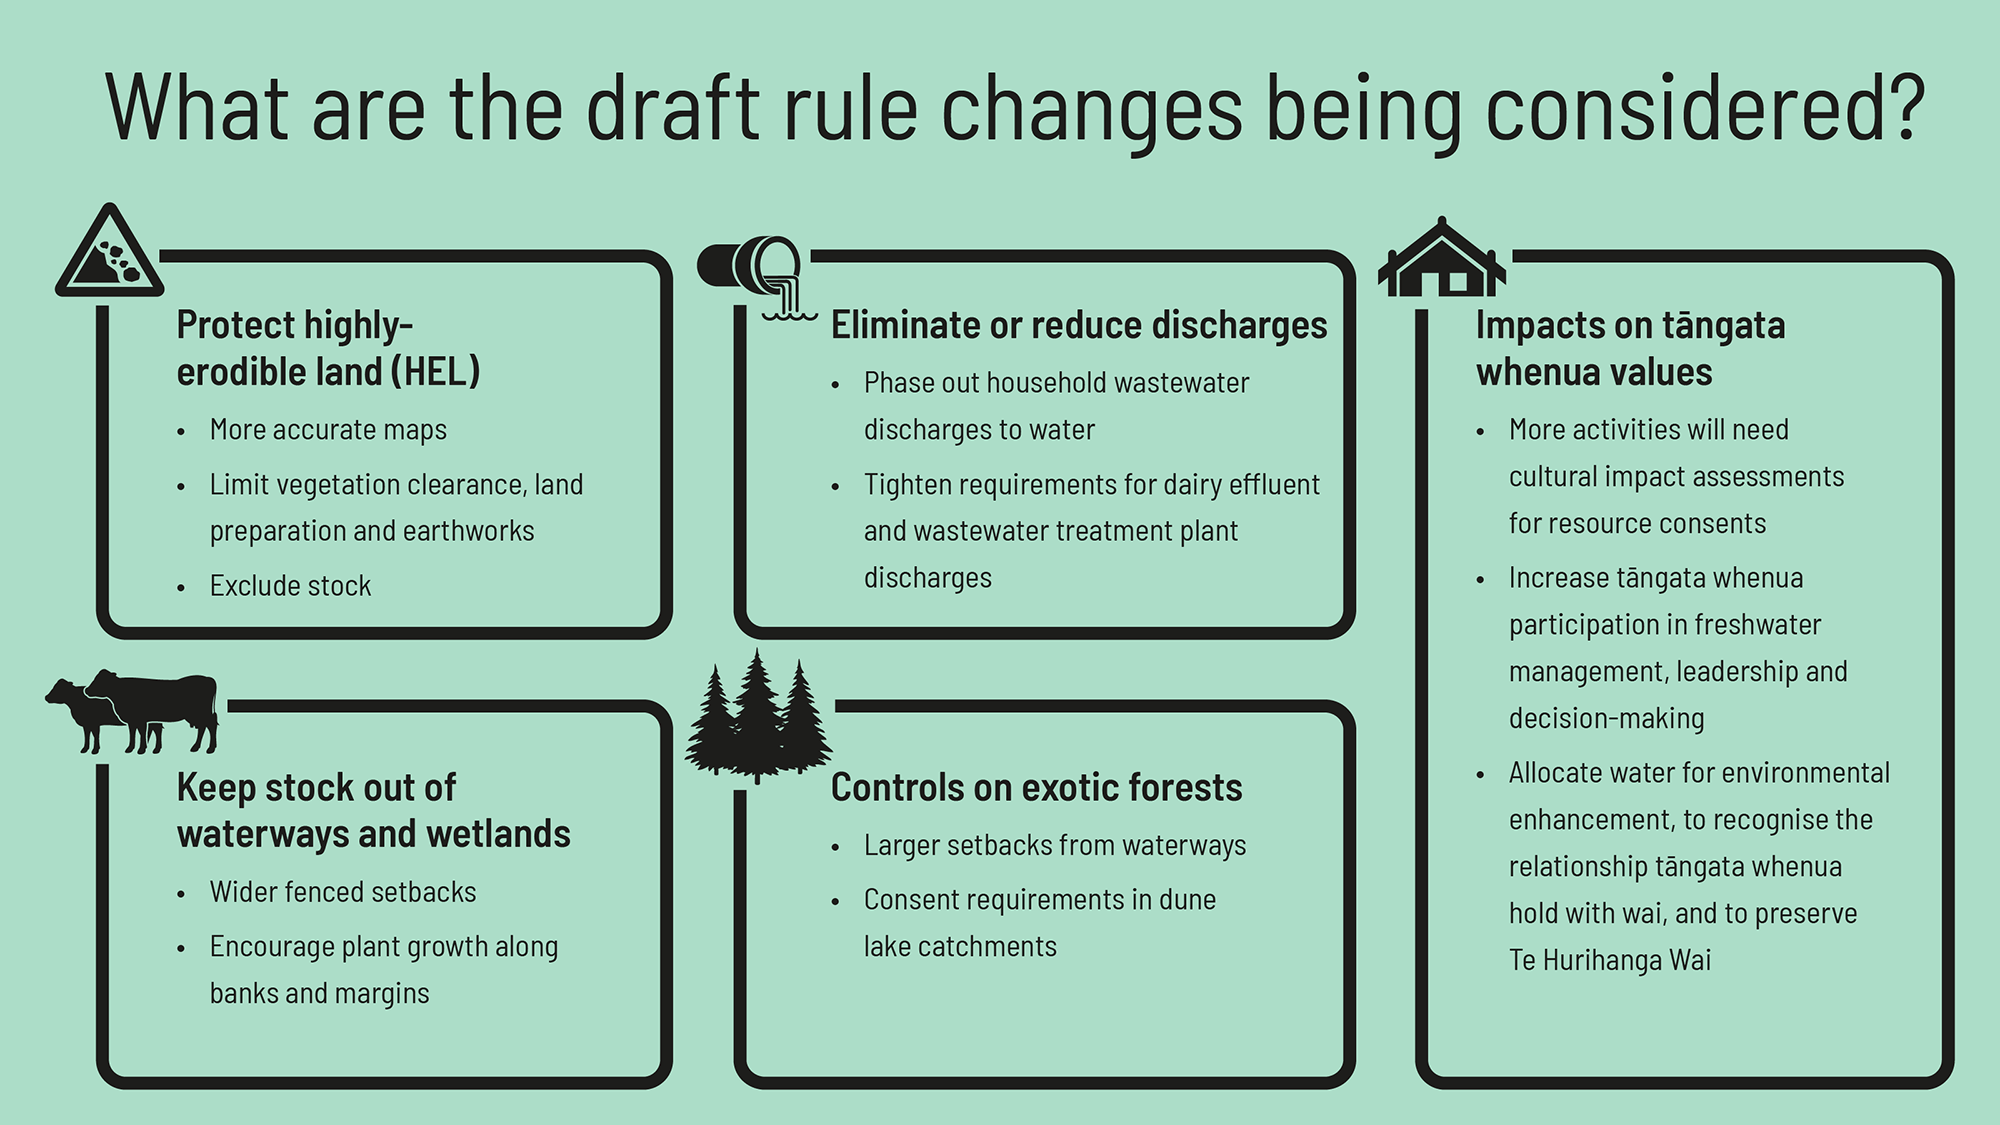 A summary of the key draft rule changes.